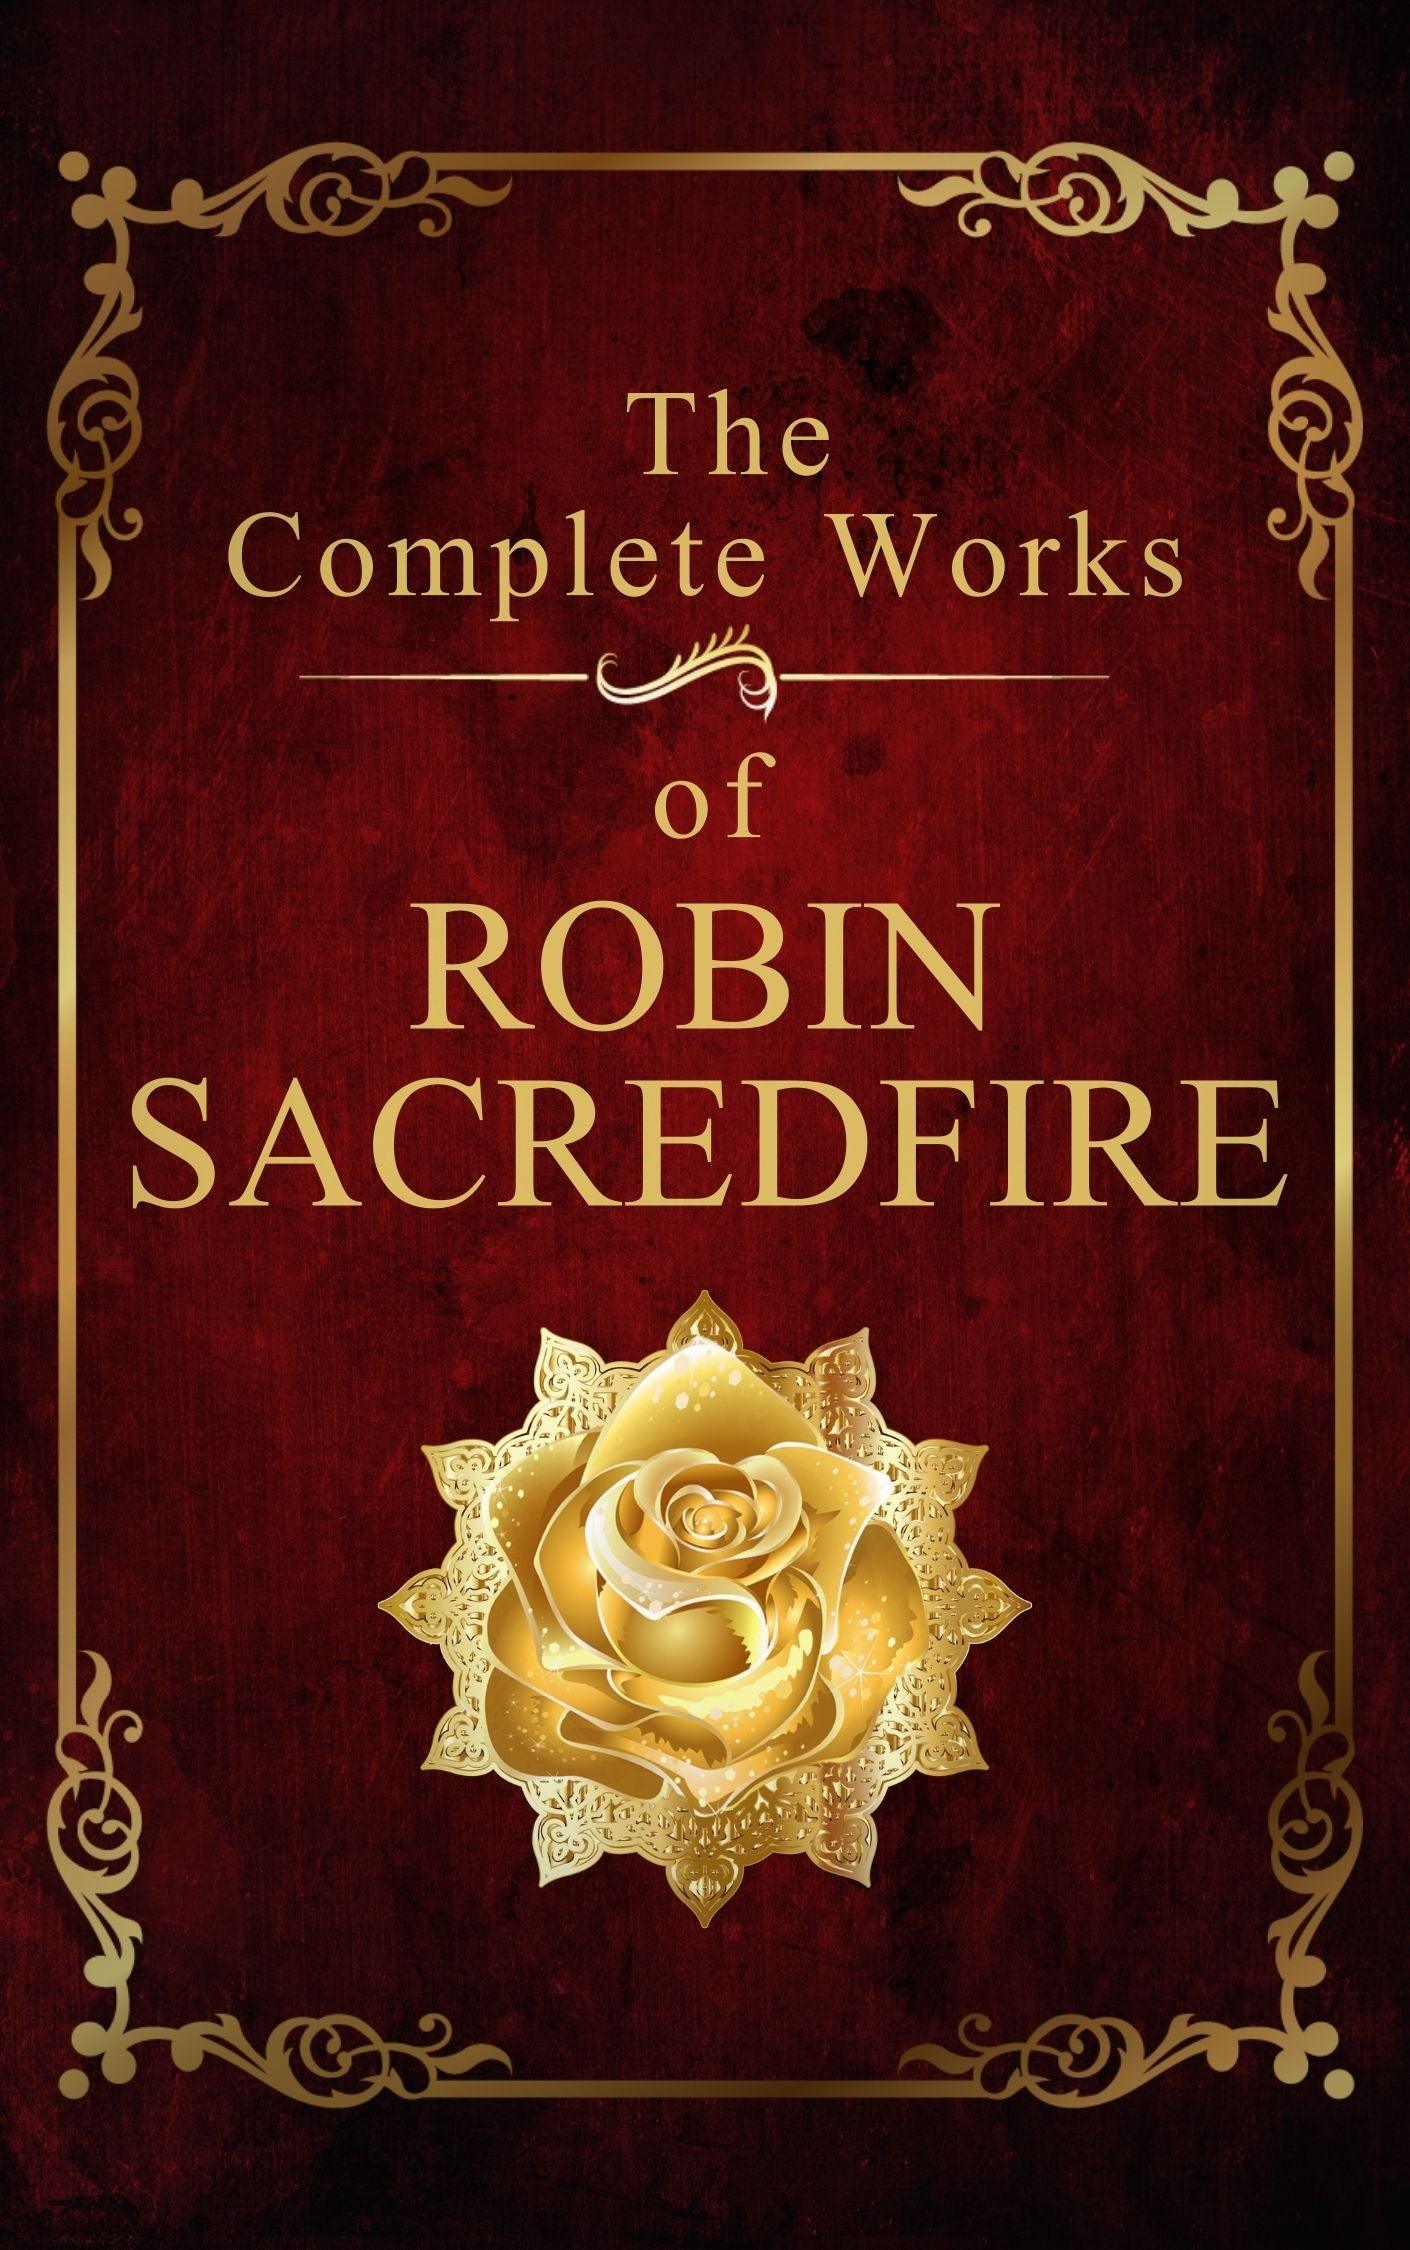 The Complete Works of Robin Sacredfire - 22 Lions